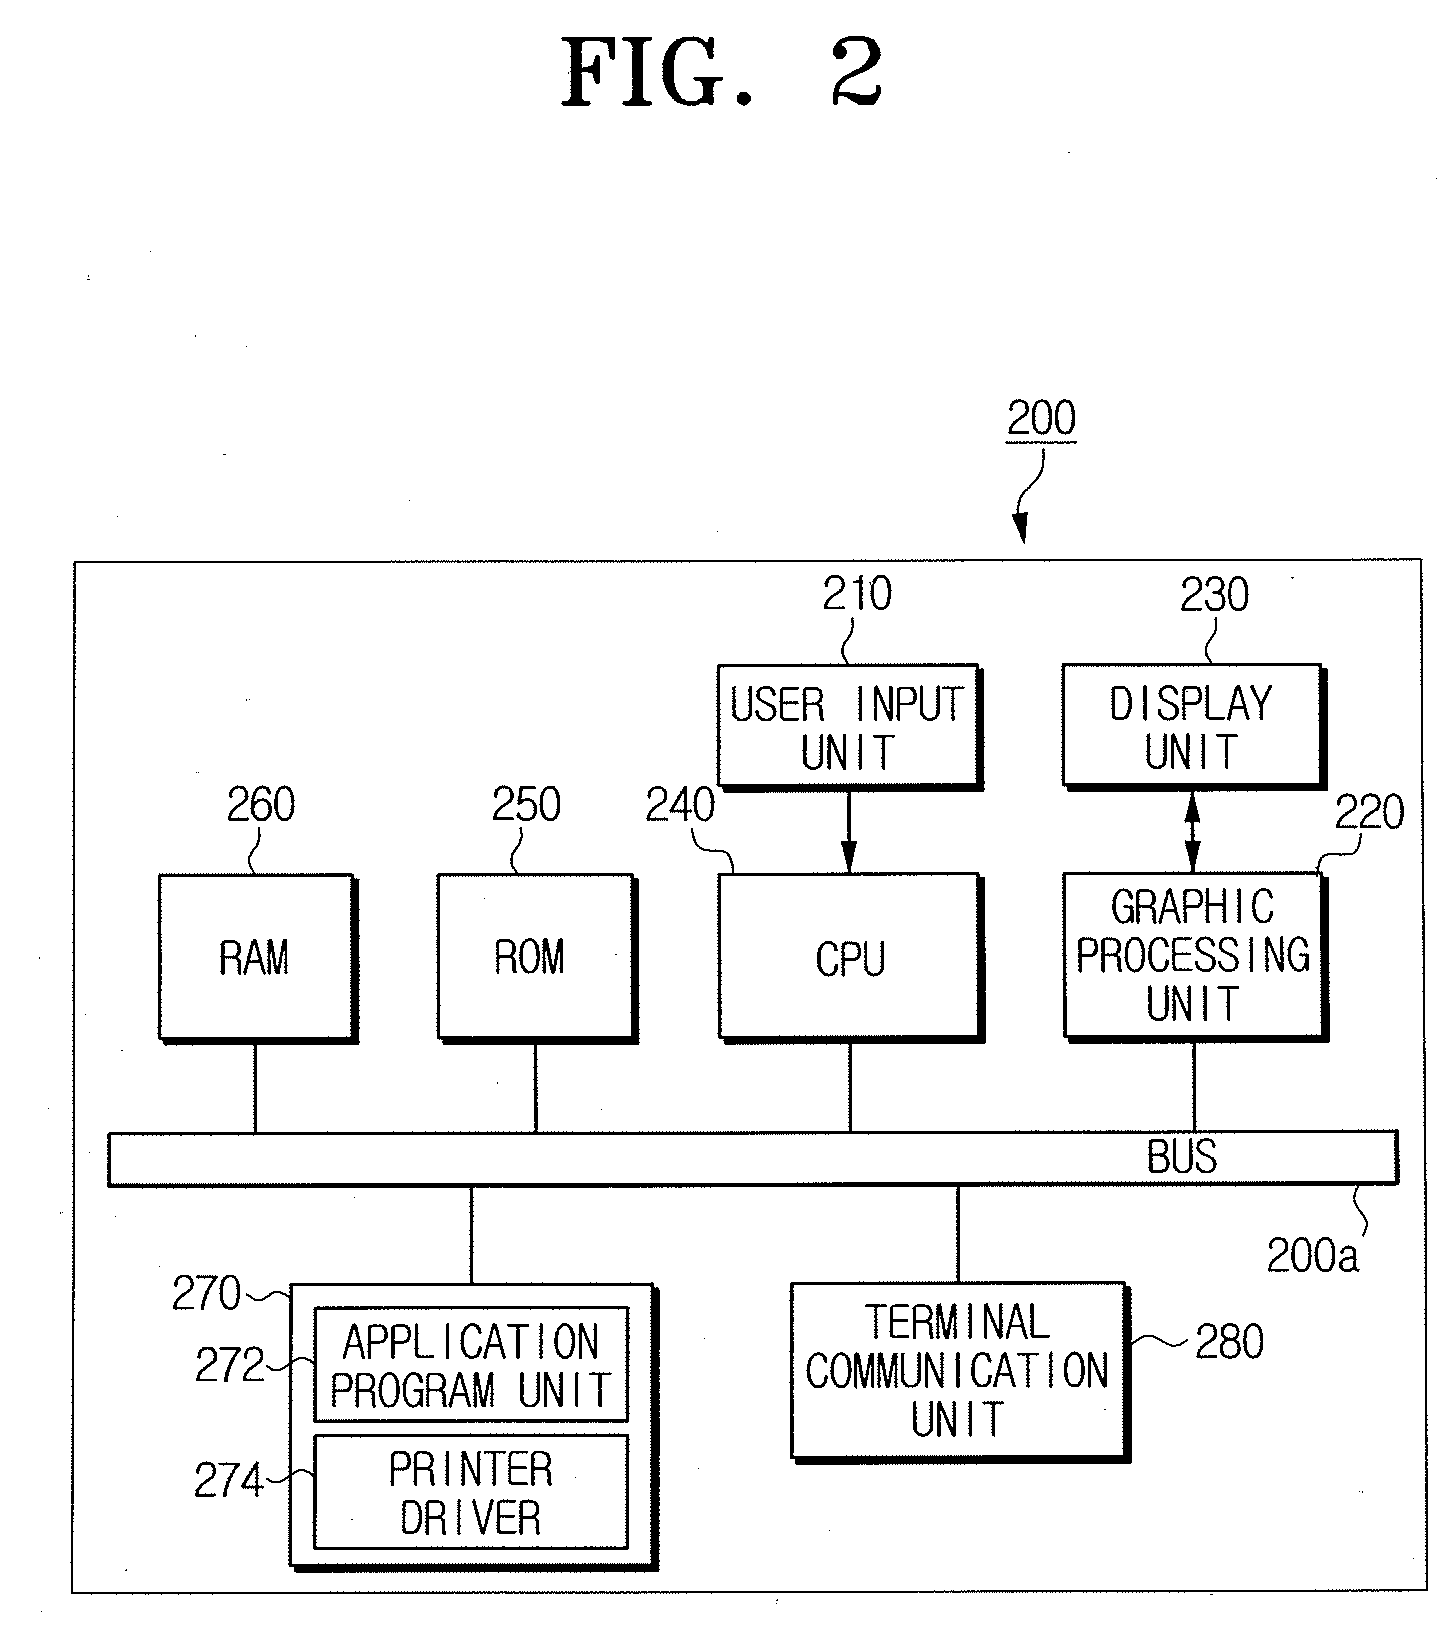 Network printer and network printing method of restricting host from using network printer